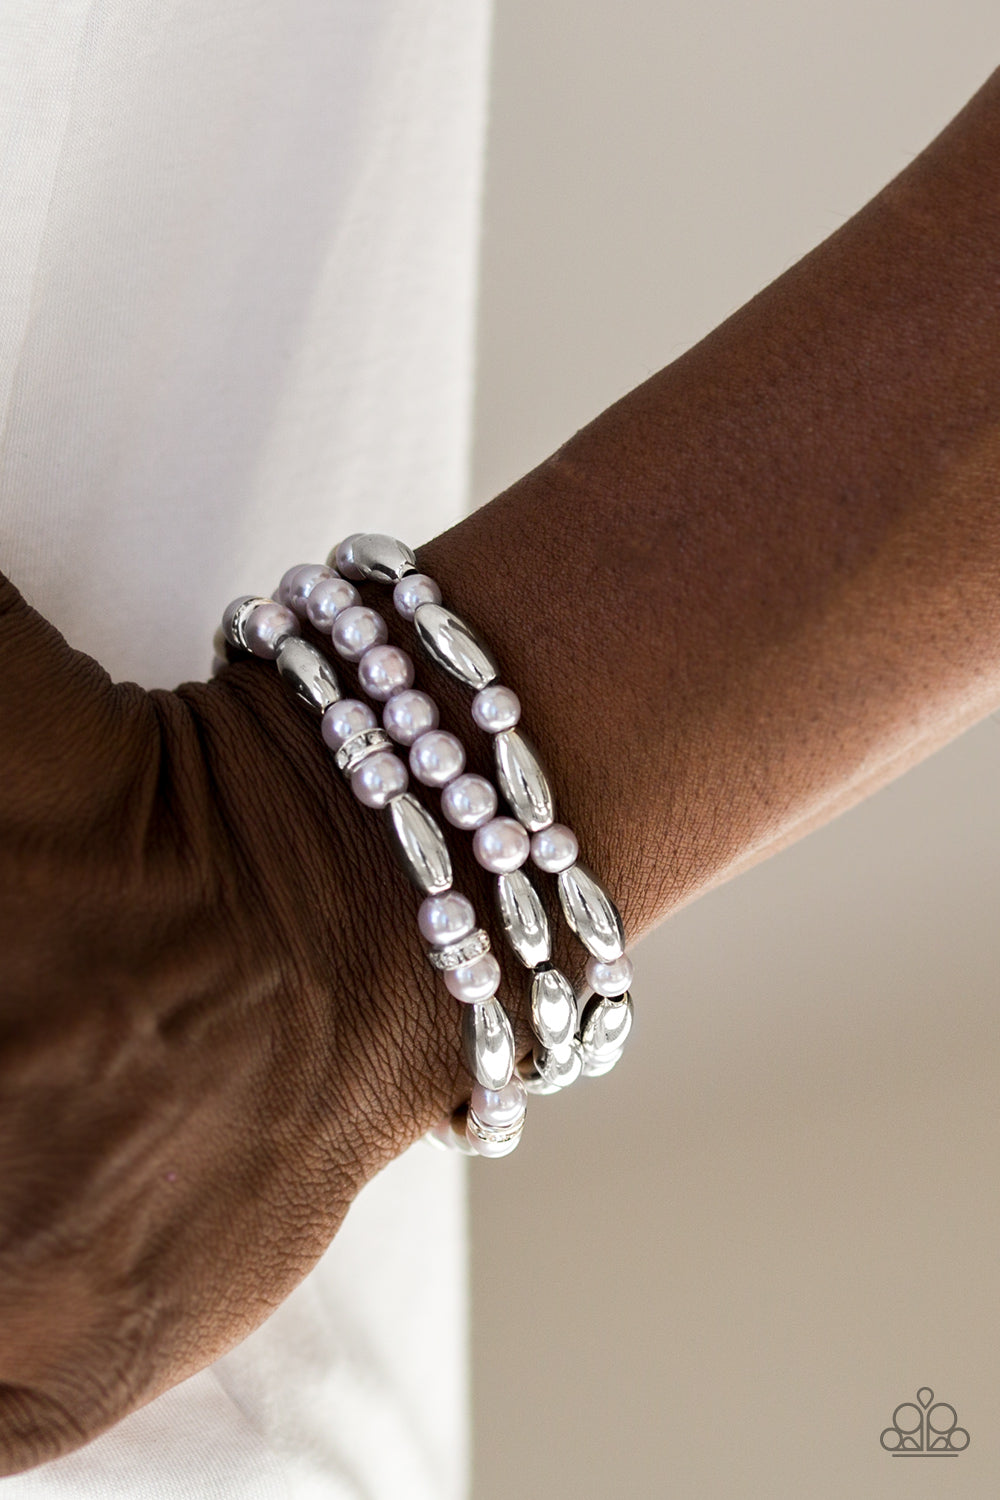 Paparazzi Chic Contender - Silver Pearls - White Rhinestones - Set of 3 Bracelets - $5 Jewelry With Ashley Swint